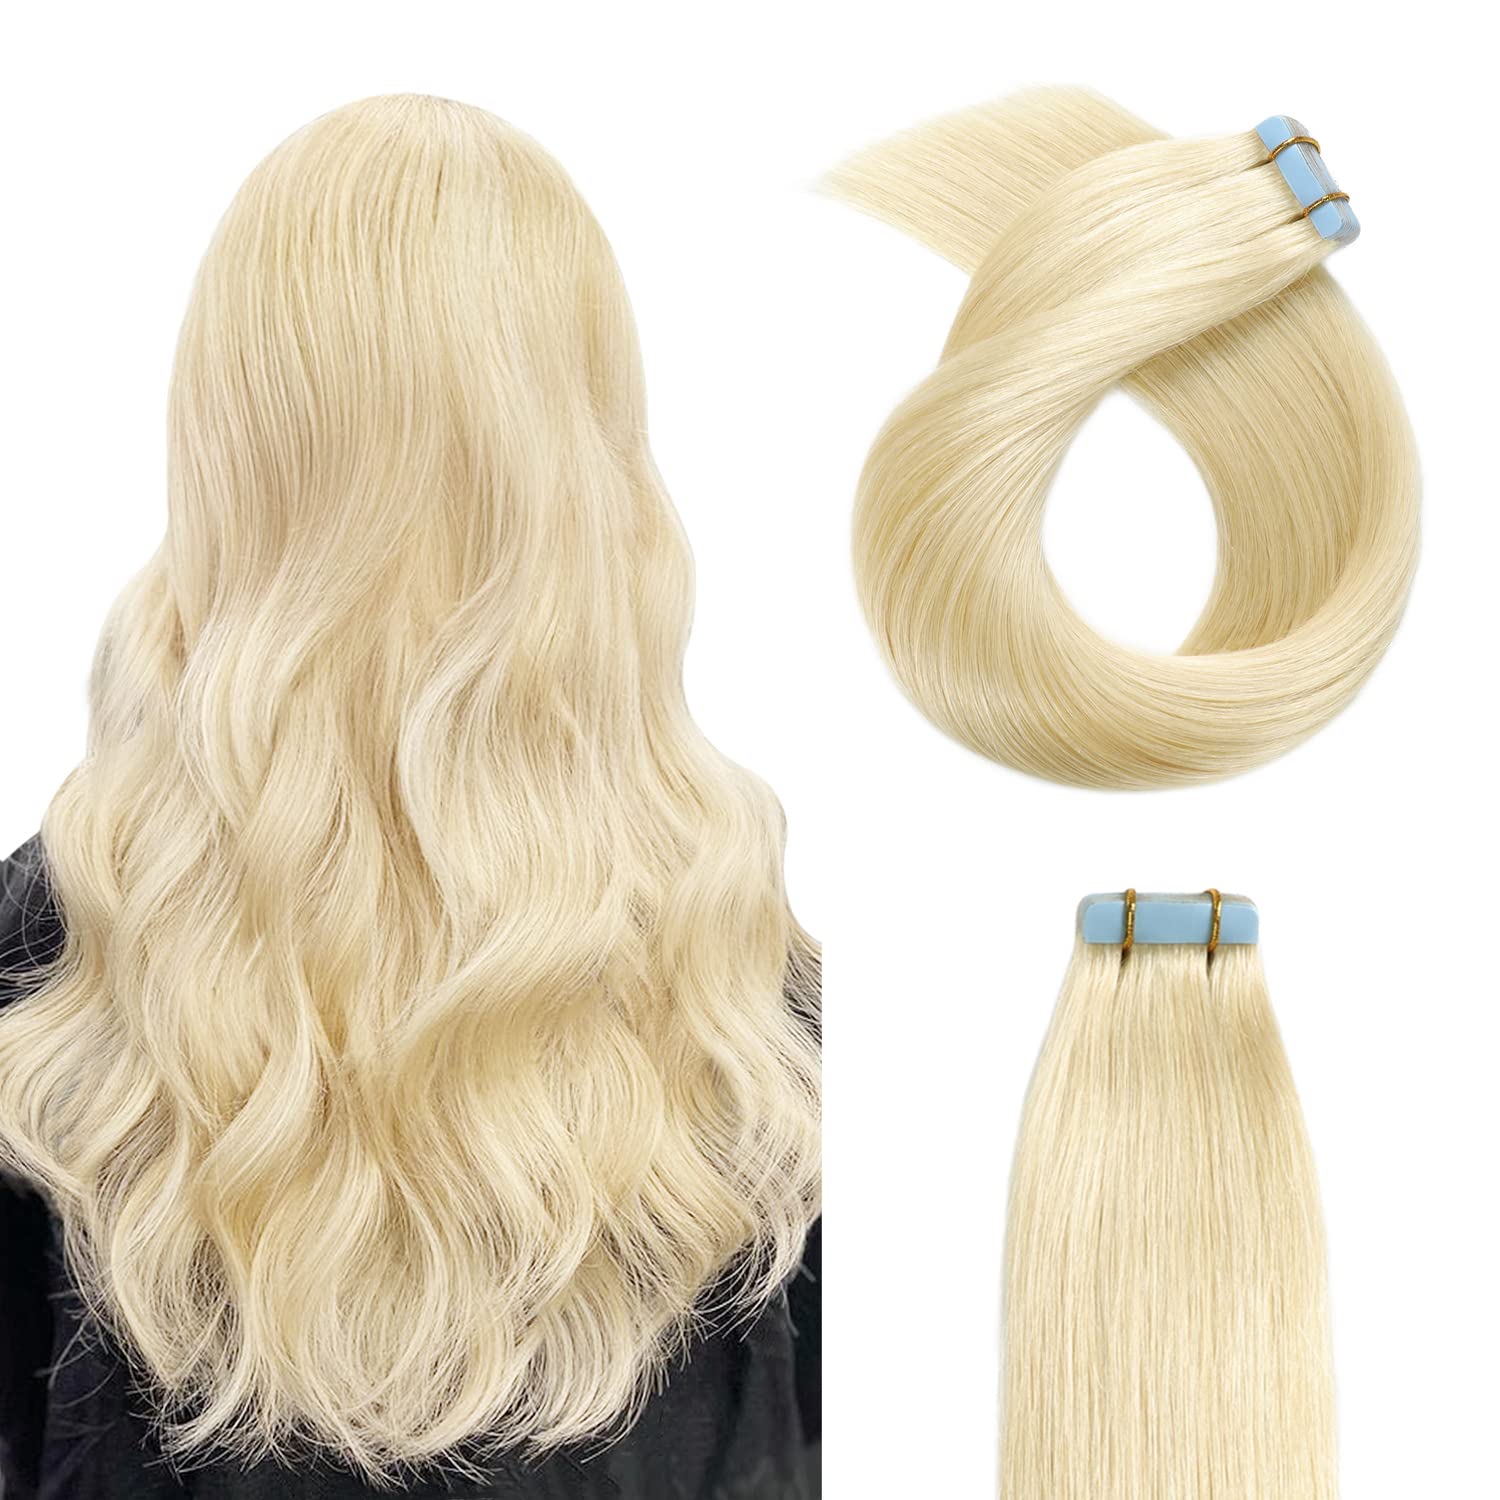 YILITE Tape in Hair Extension Platinum Blonde Color 60 Brazilian Remy Human Hair Tape ins 12 inch - 20 Inch Seamless Pu Tape in Hair 50g 20 Pcs Salon Quality Soft Human Hair